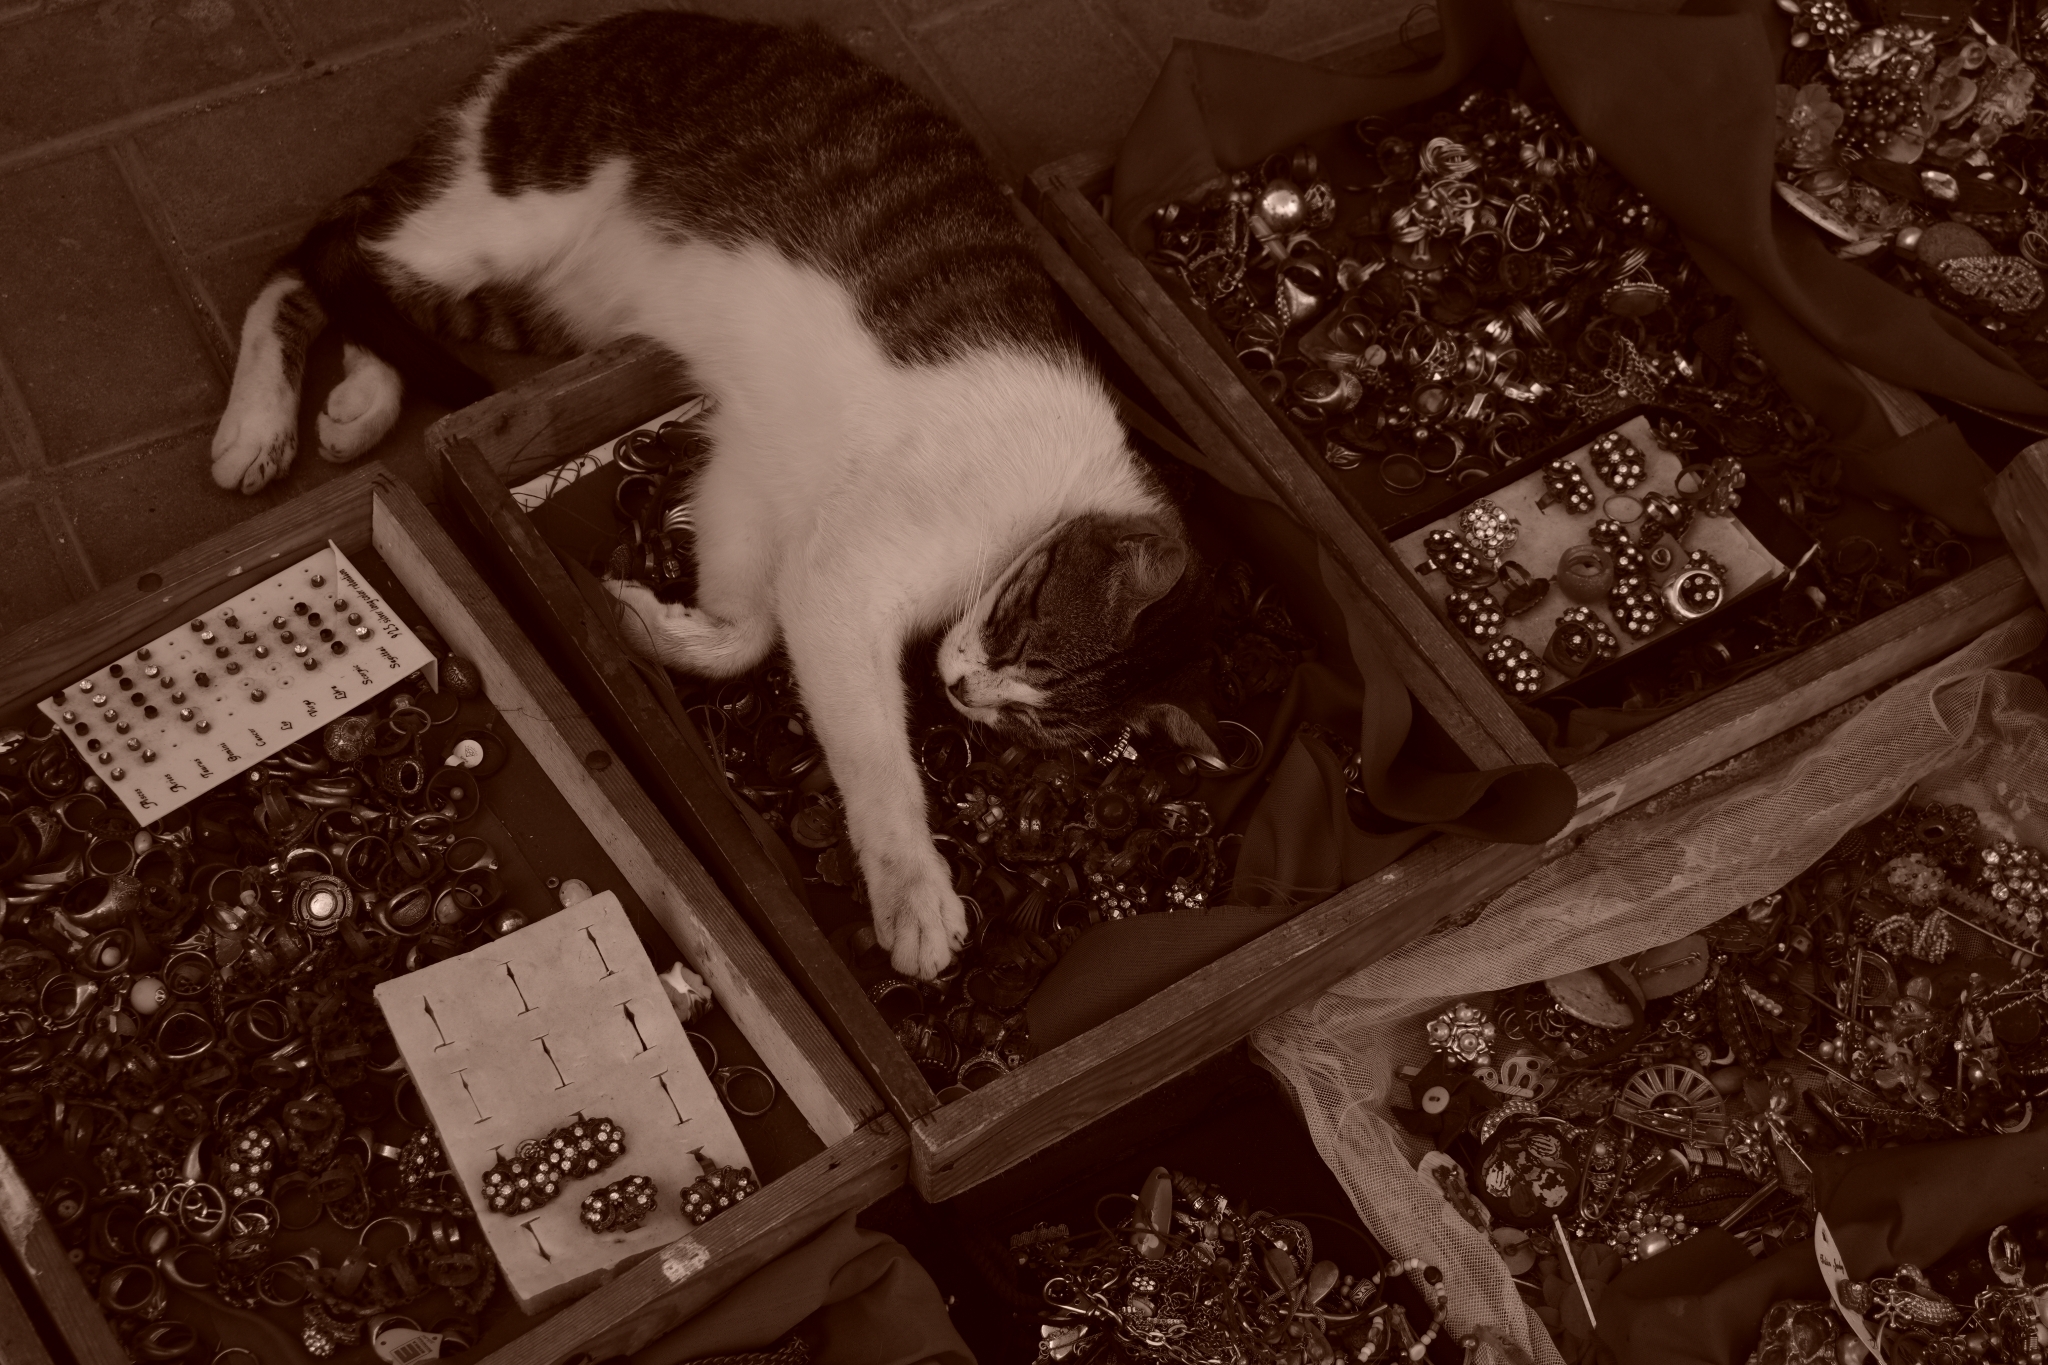 Sample image of a cat sleeping on Moroccan accessories Creative Look: Sepia